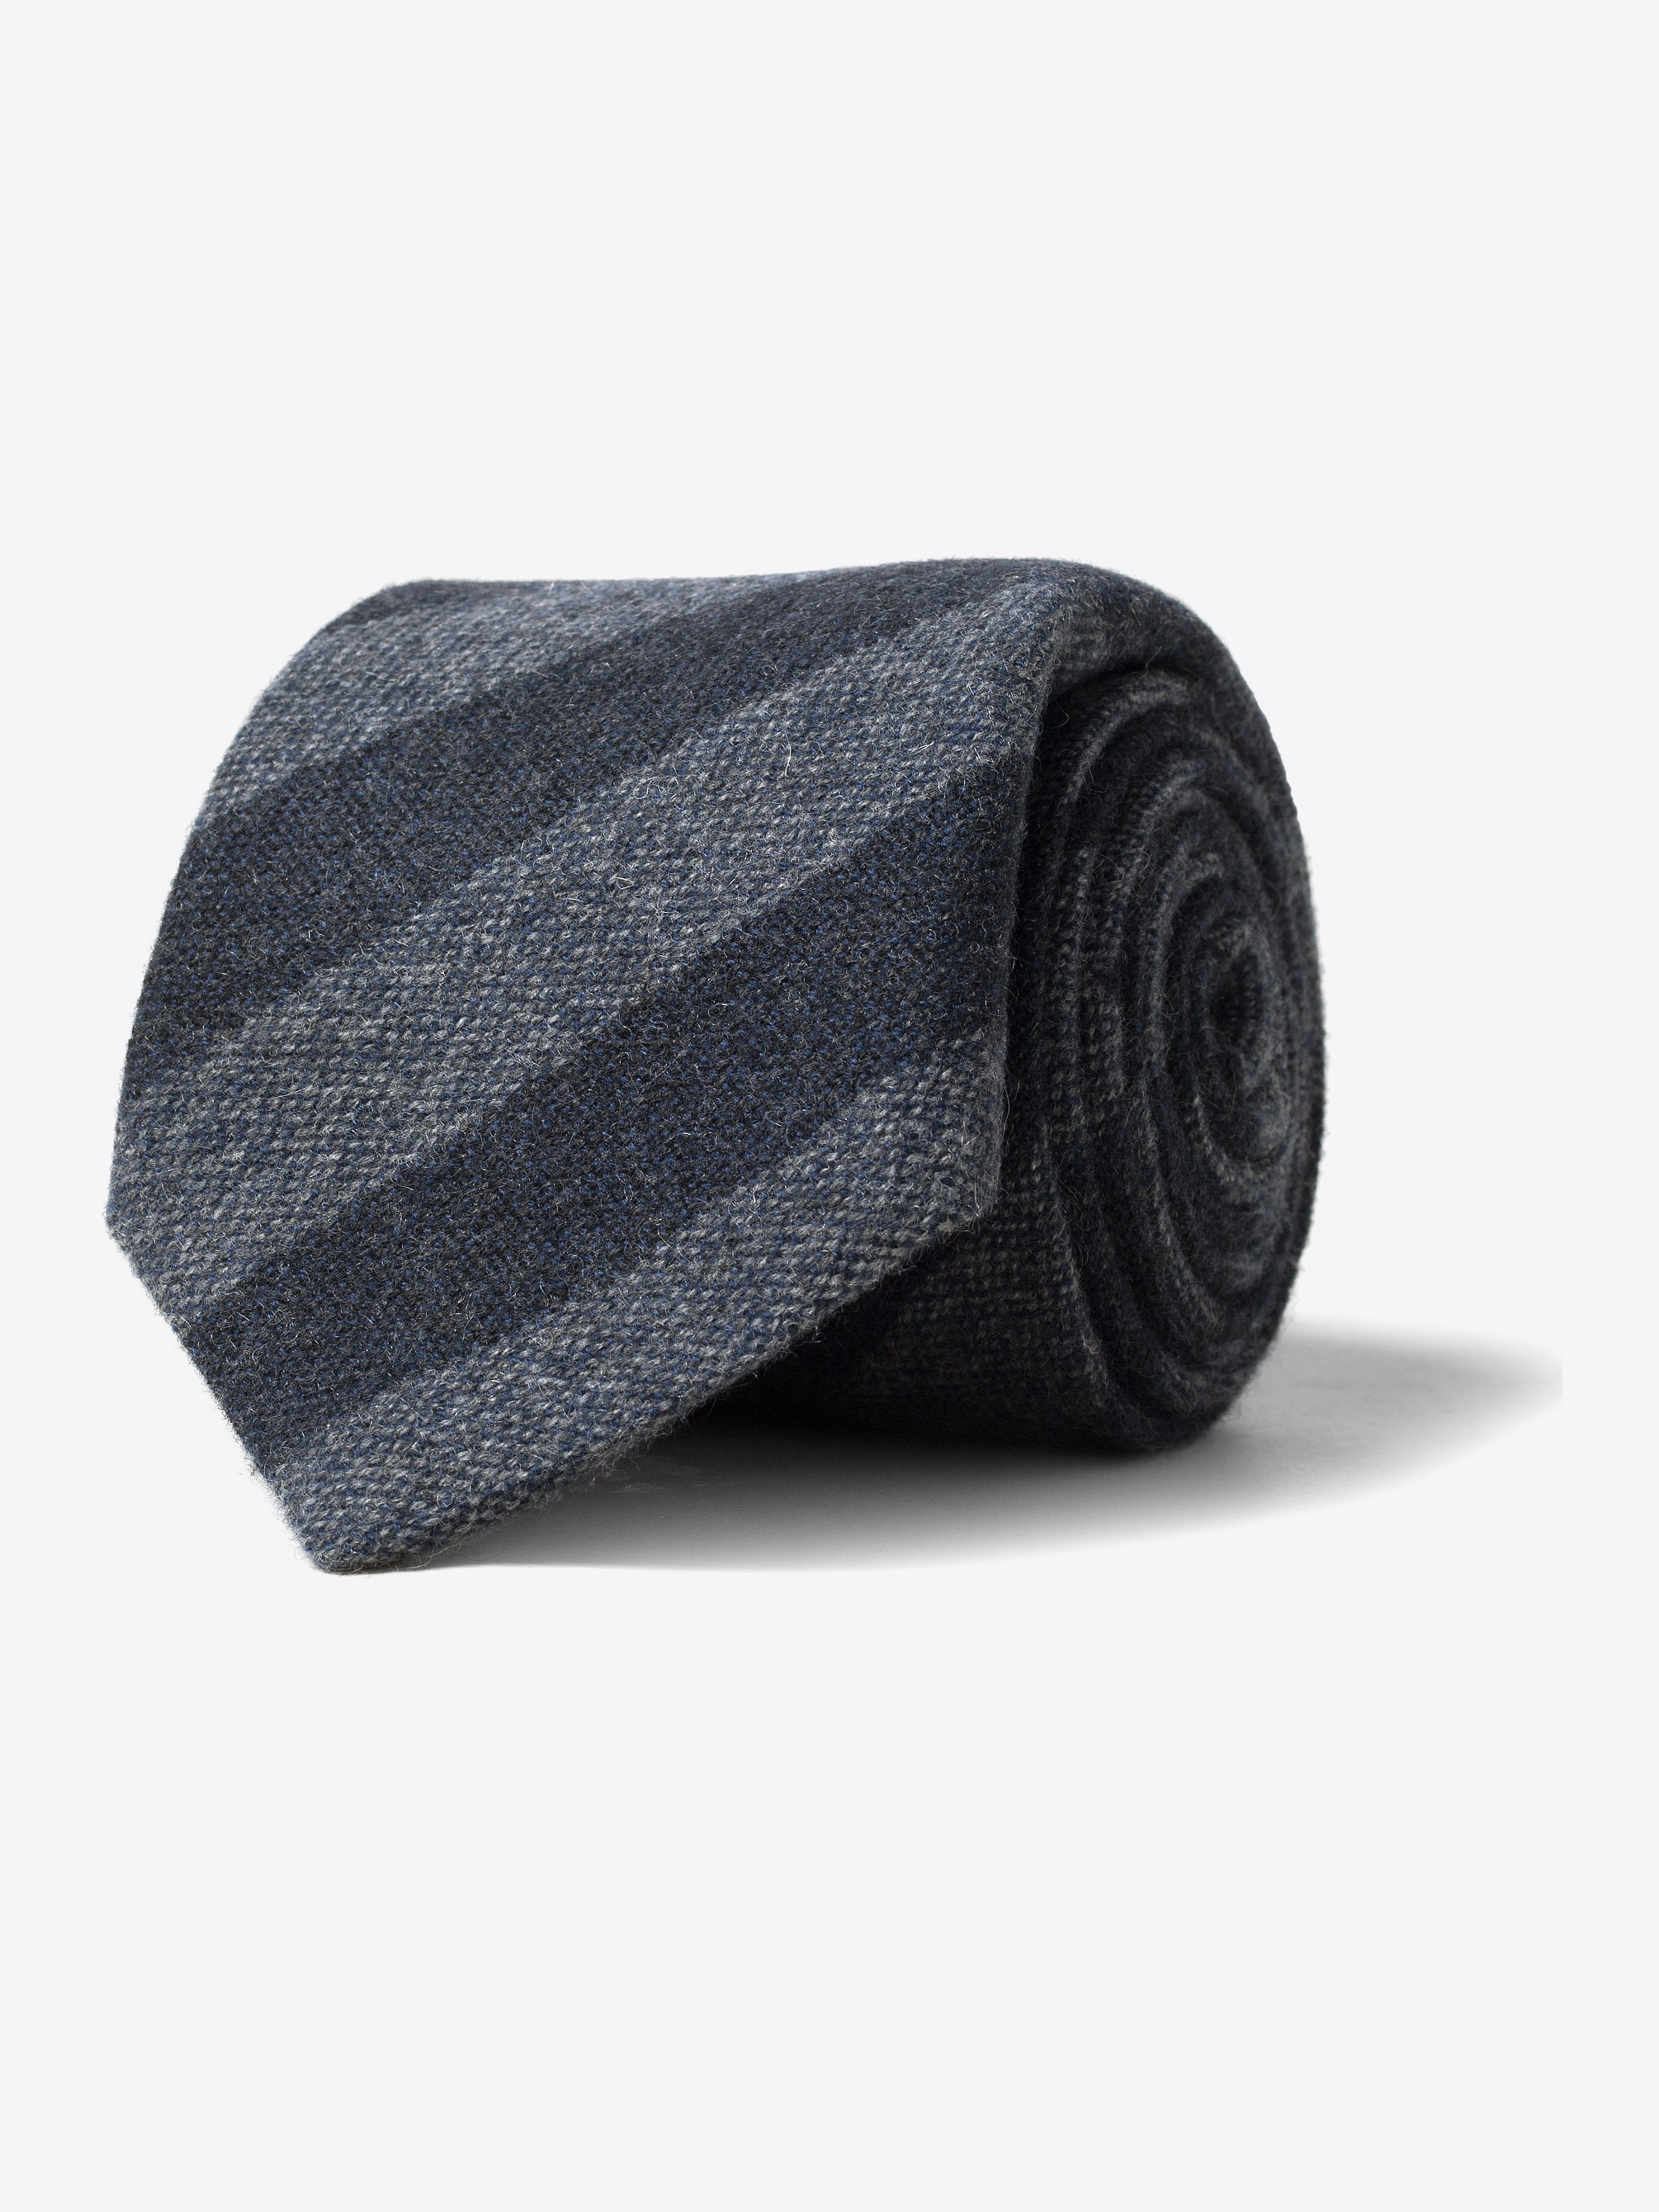 Zoom Image of Grey and Charcoal Striped Cashmere Tie